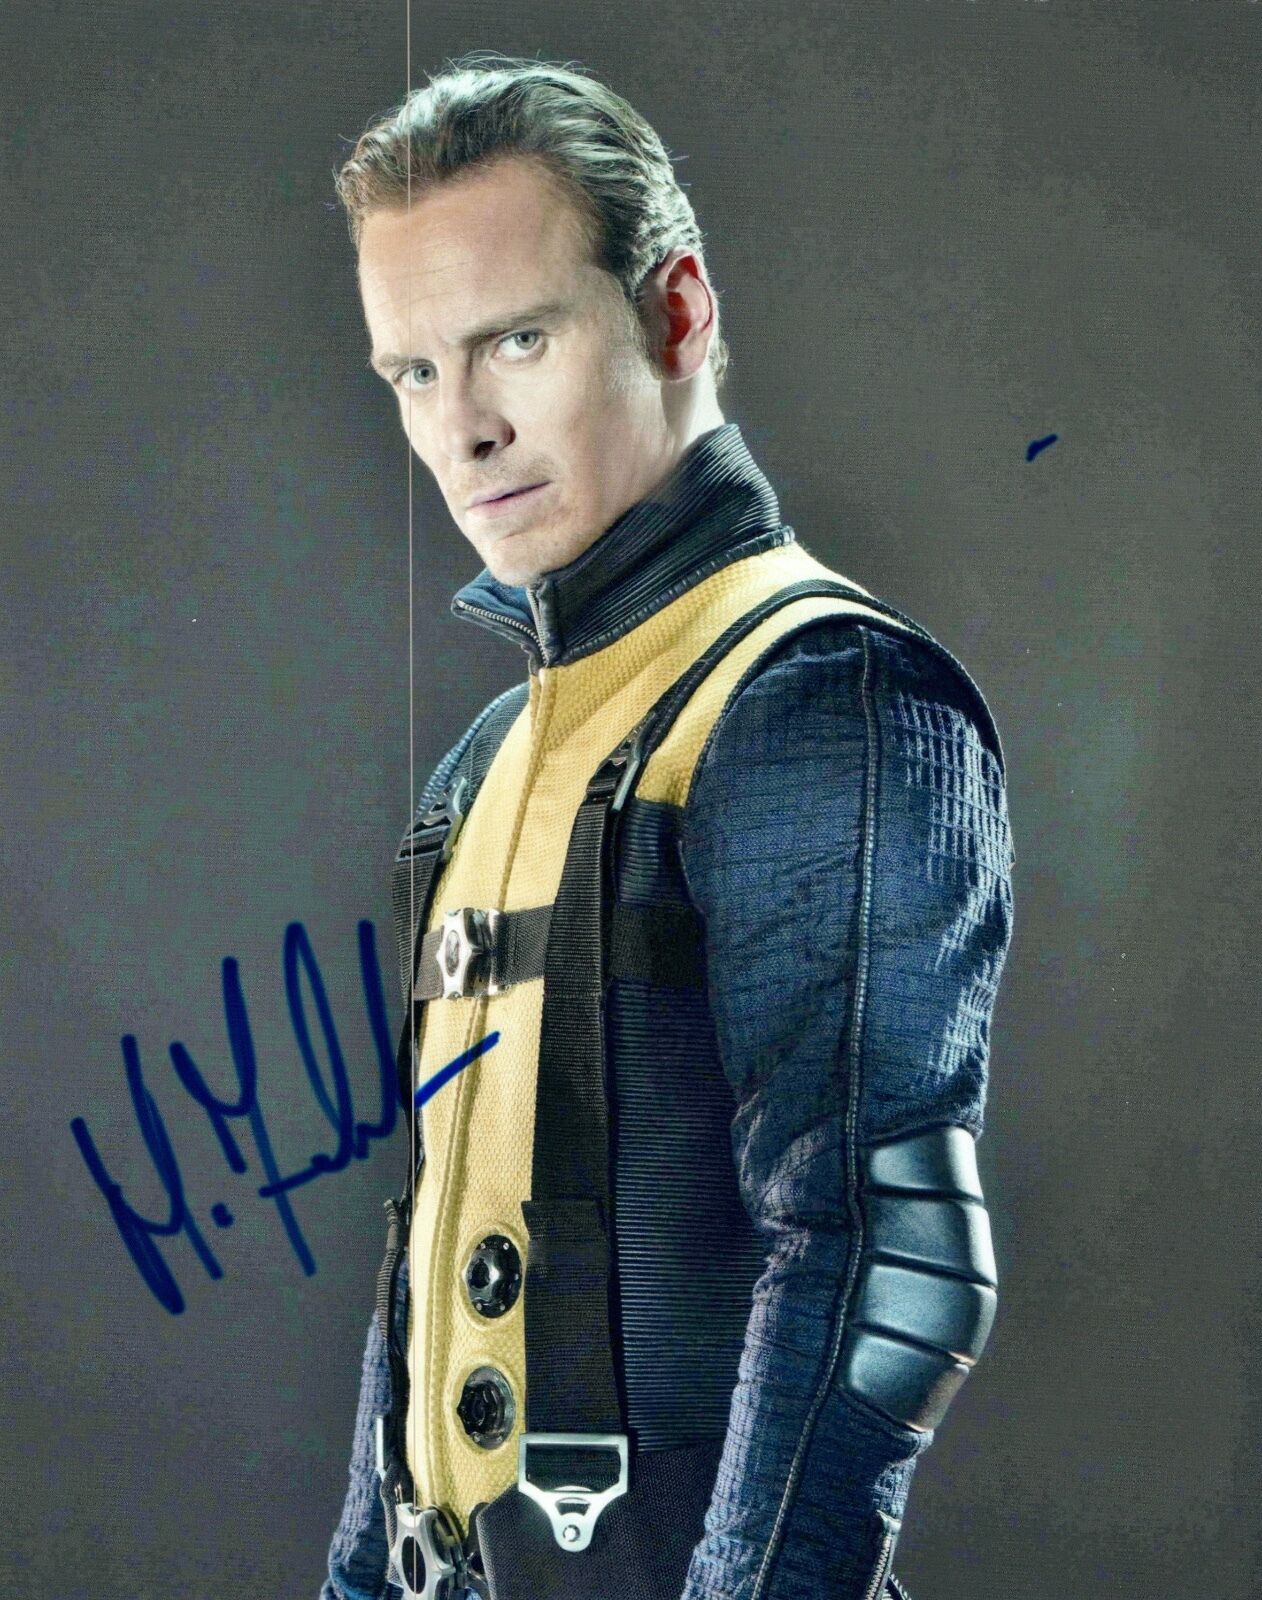 Michael Fassbender Signed Autographed 8x10 Photo Poster painting X-Men Assasin's Creed COA VD